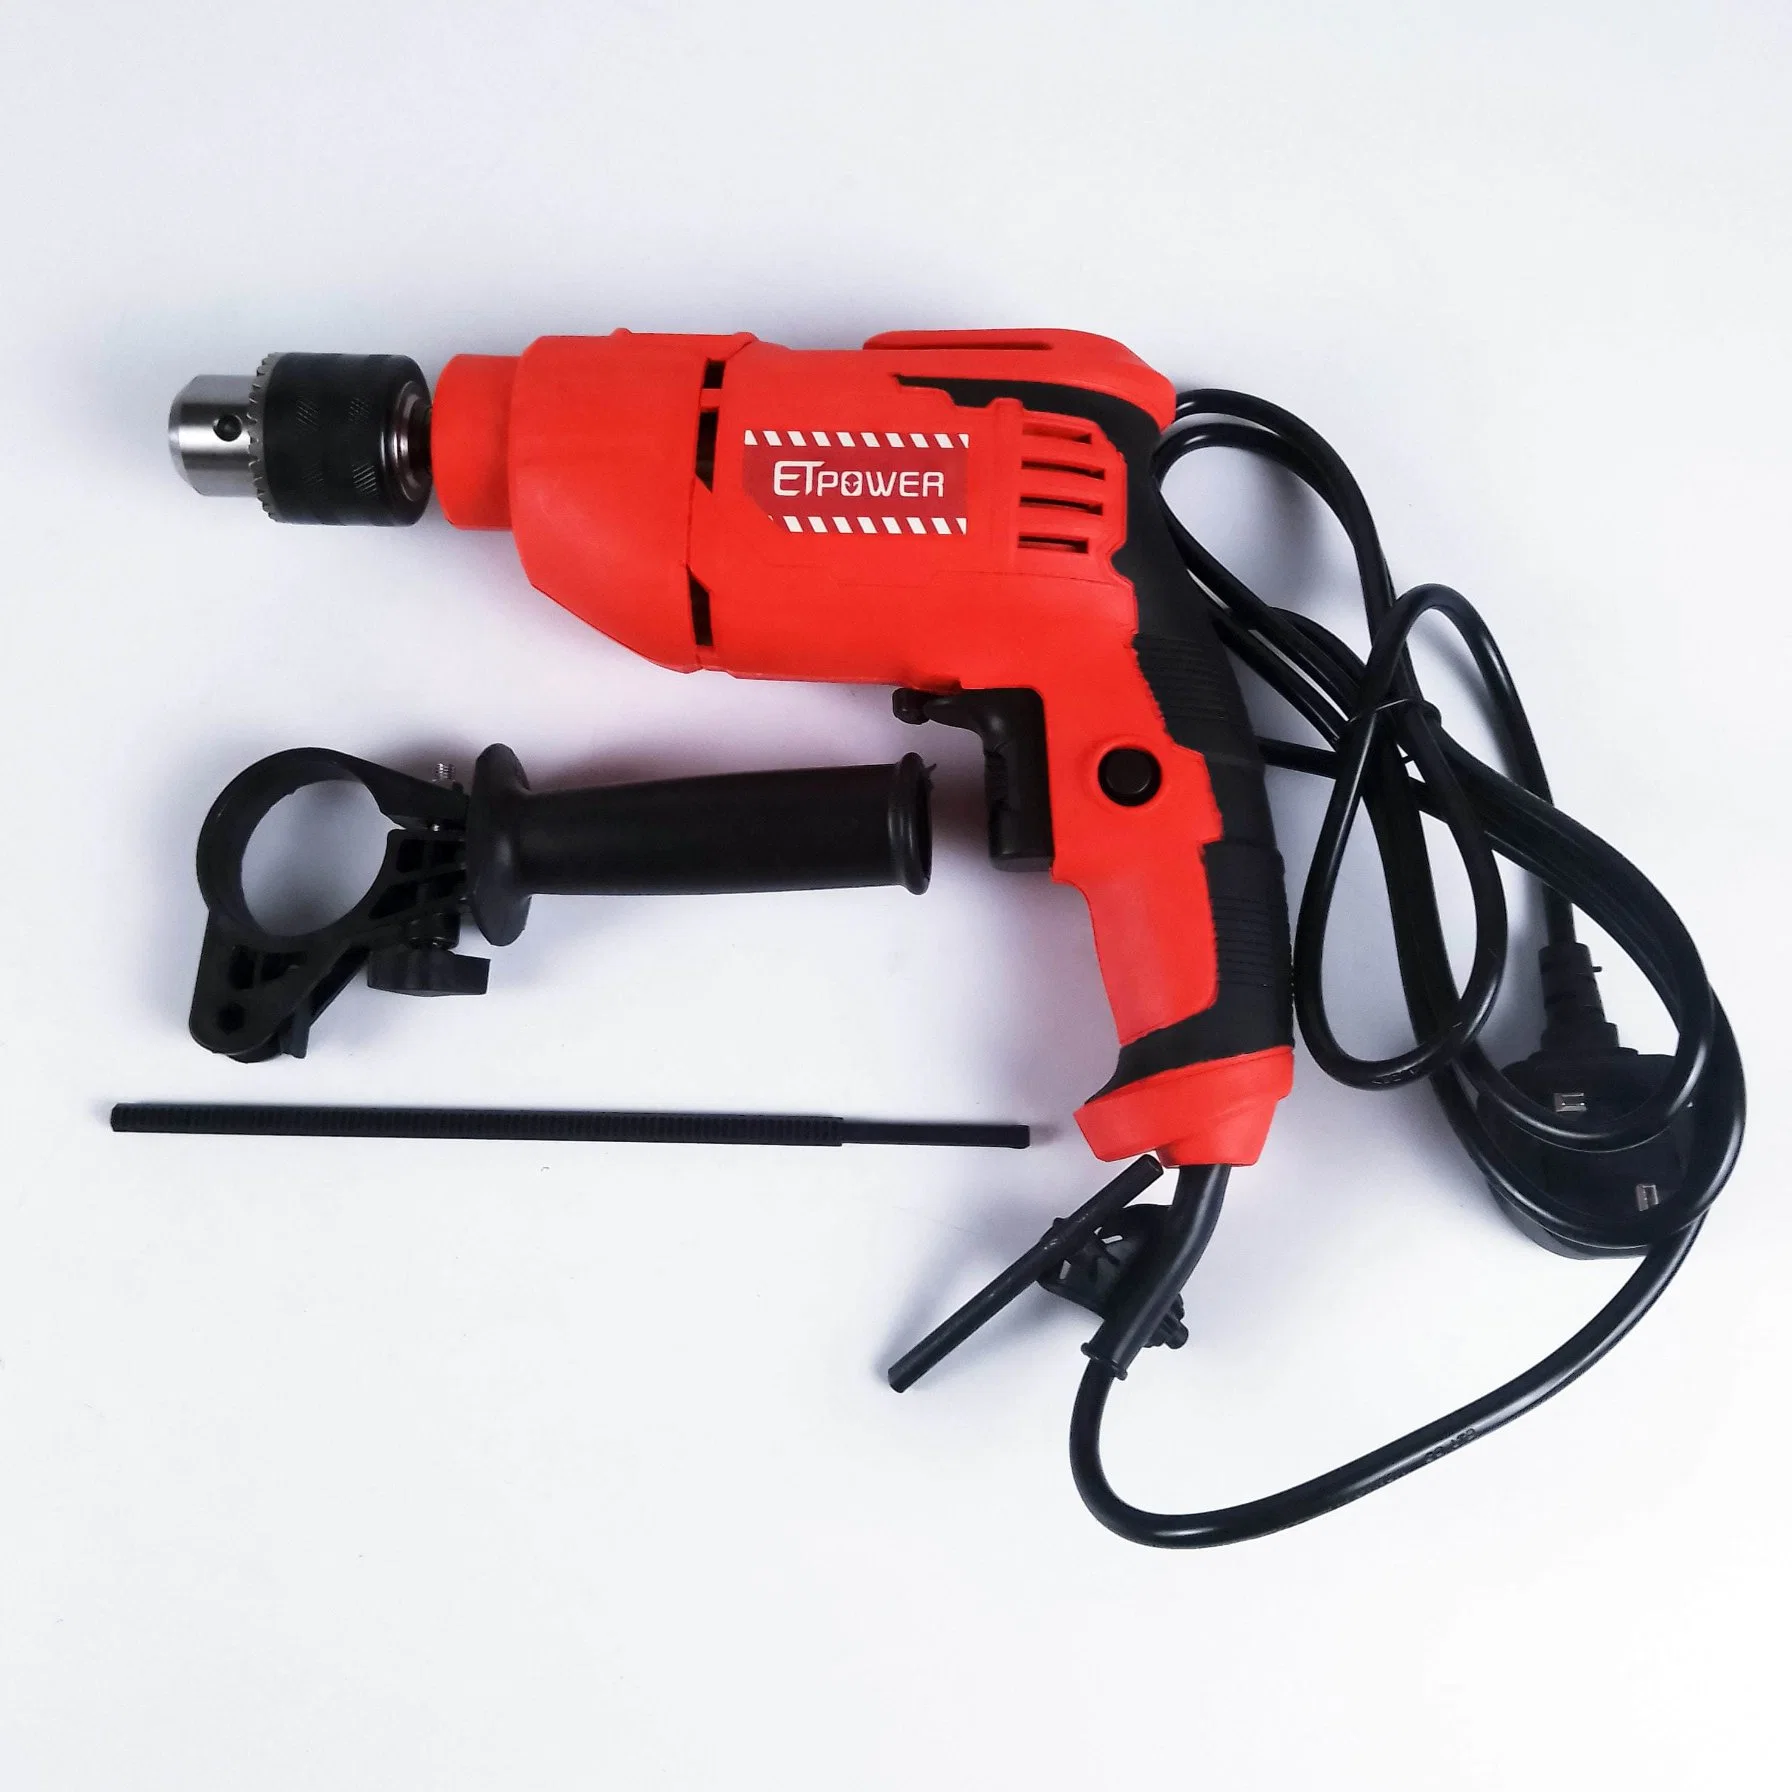 Etpower 550W 13mm Electric Impact Drill Driver Tool Set for Sale